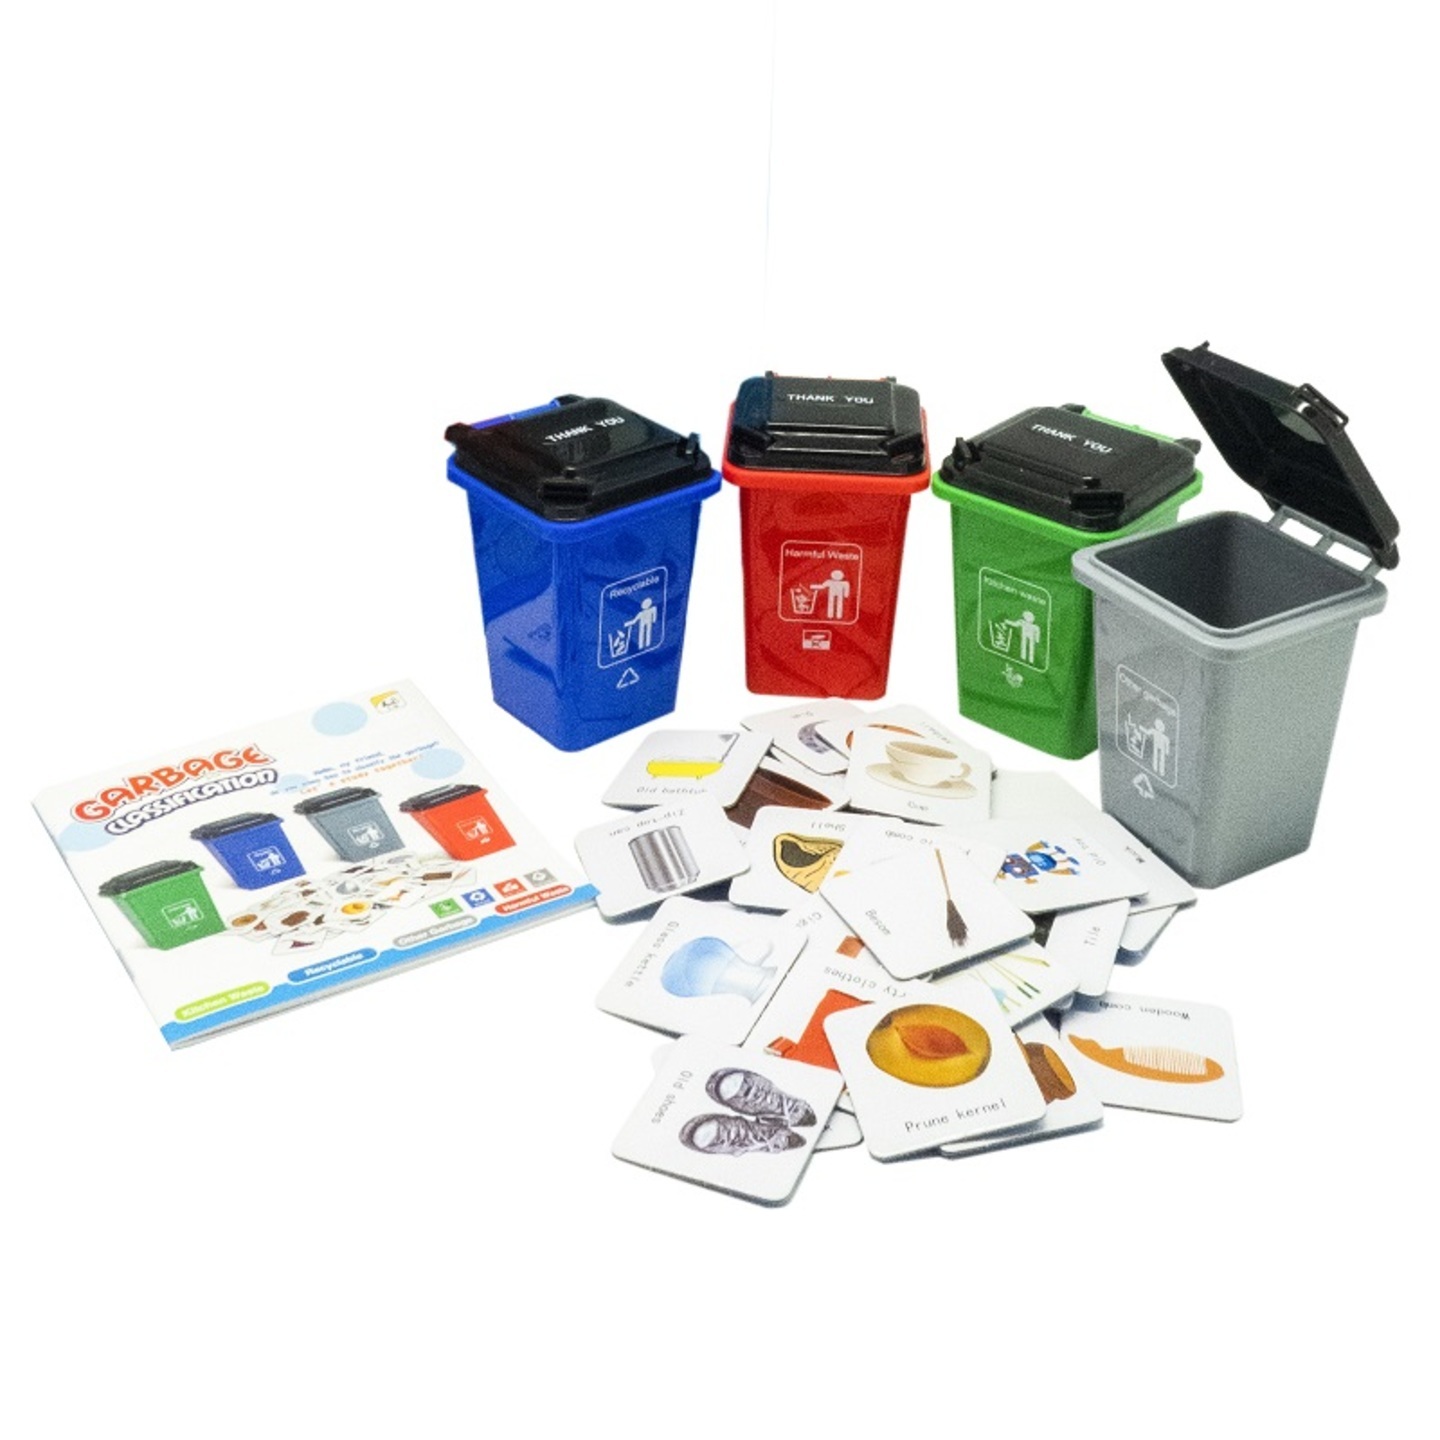 Science Play N Learn 707 Recycling Garbage Classification Learning Board Game